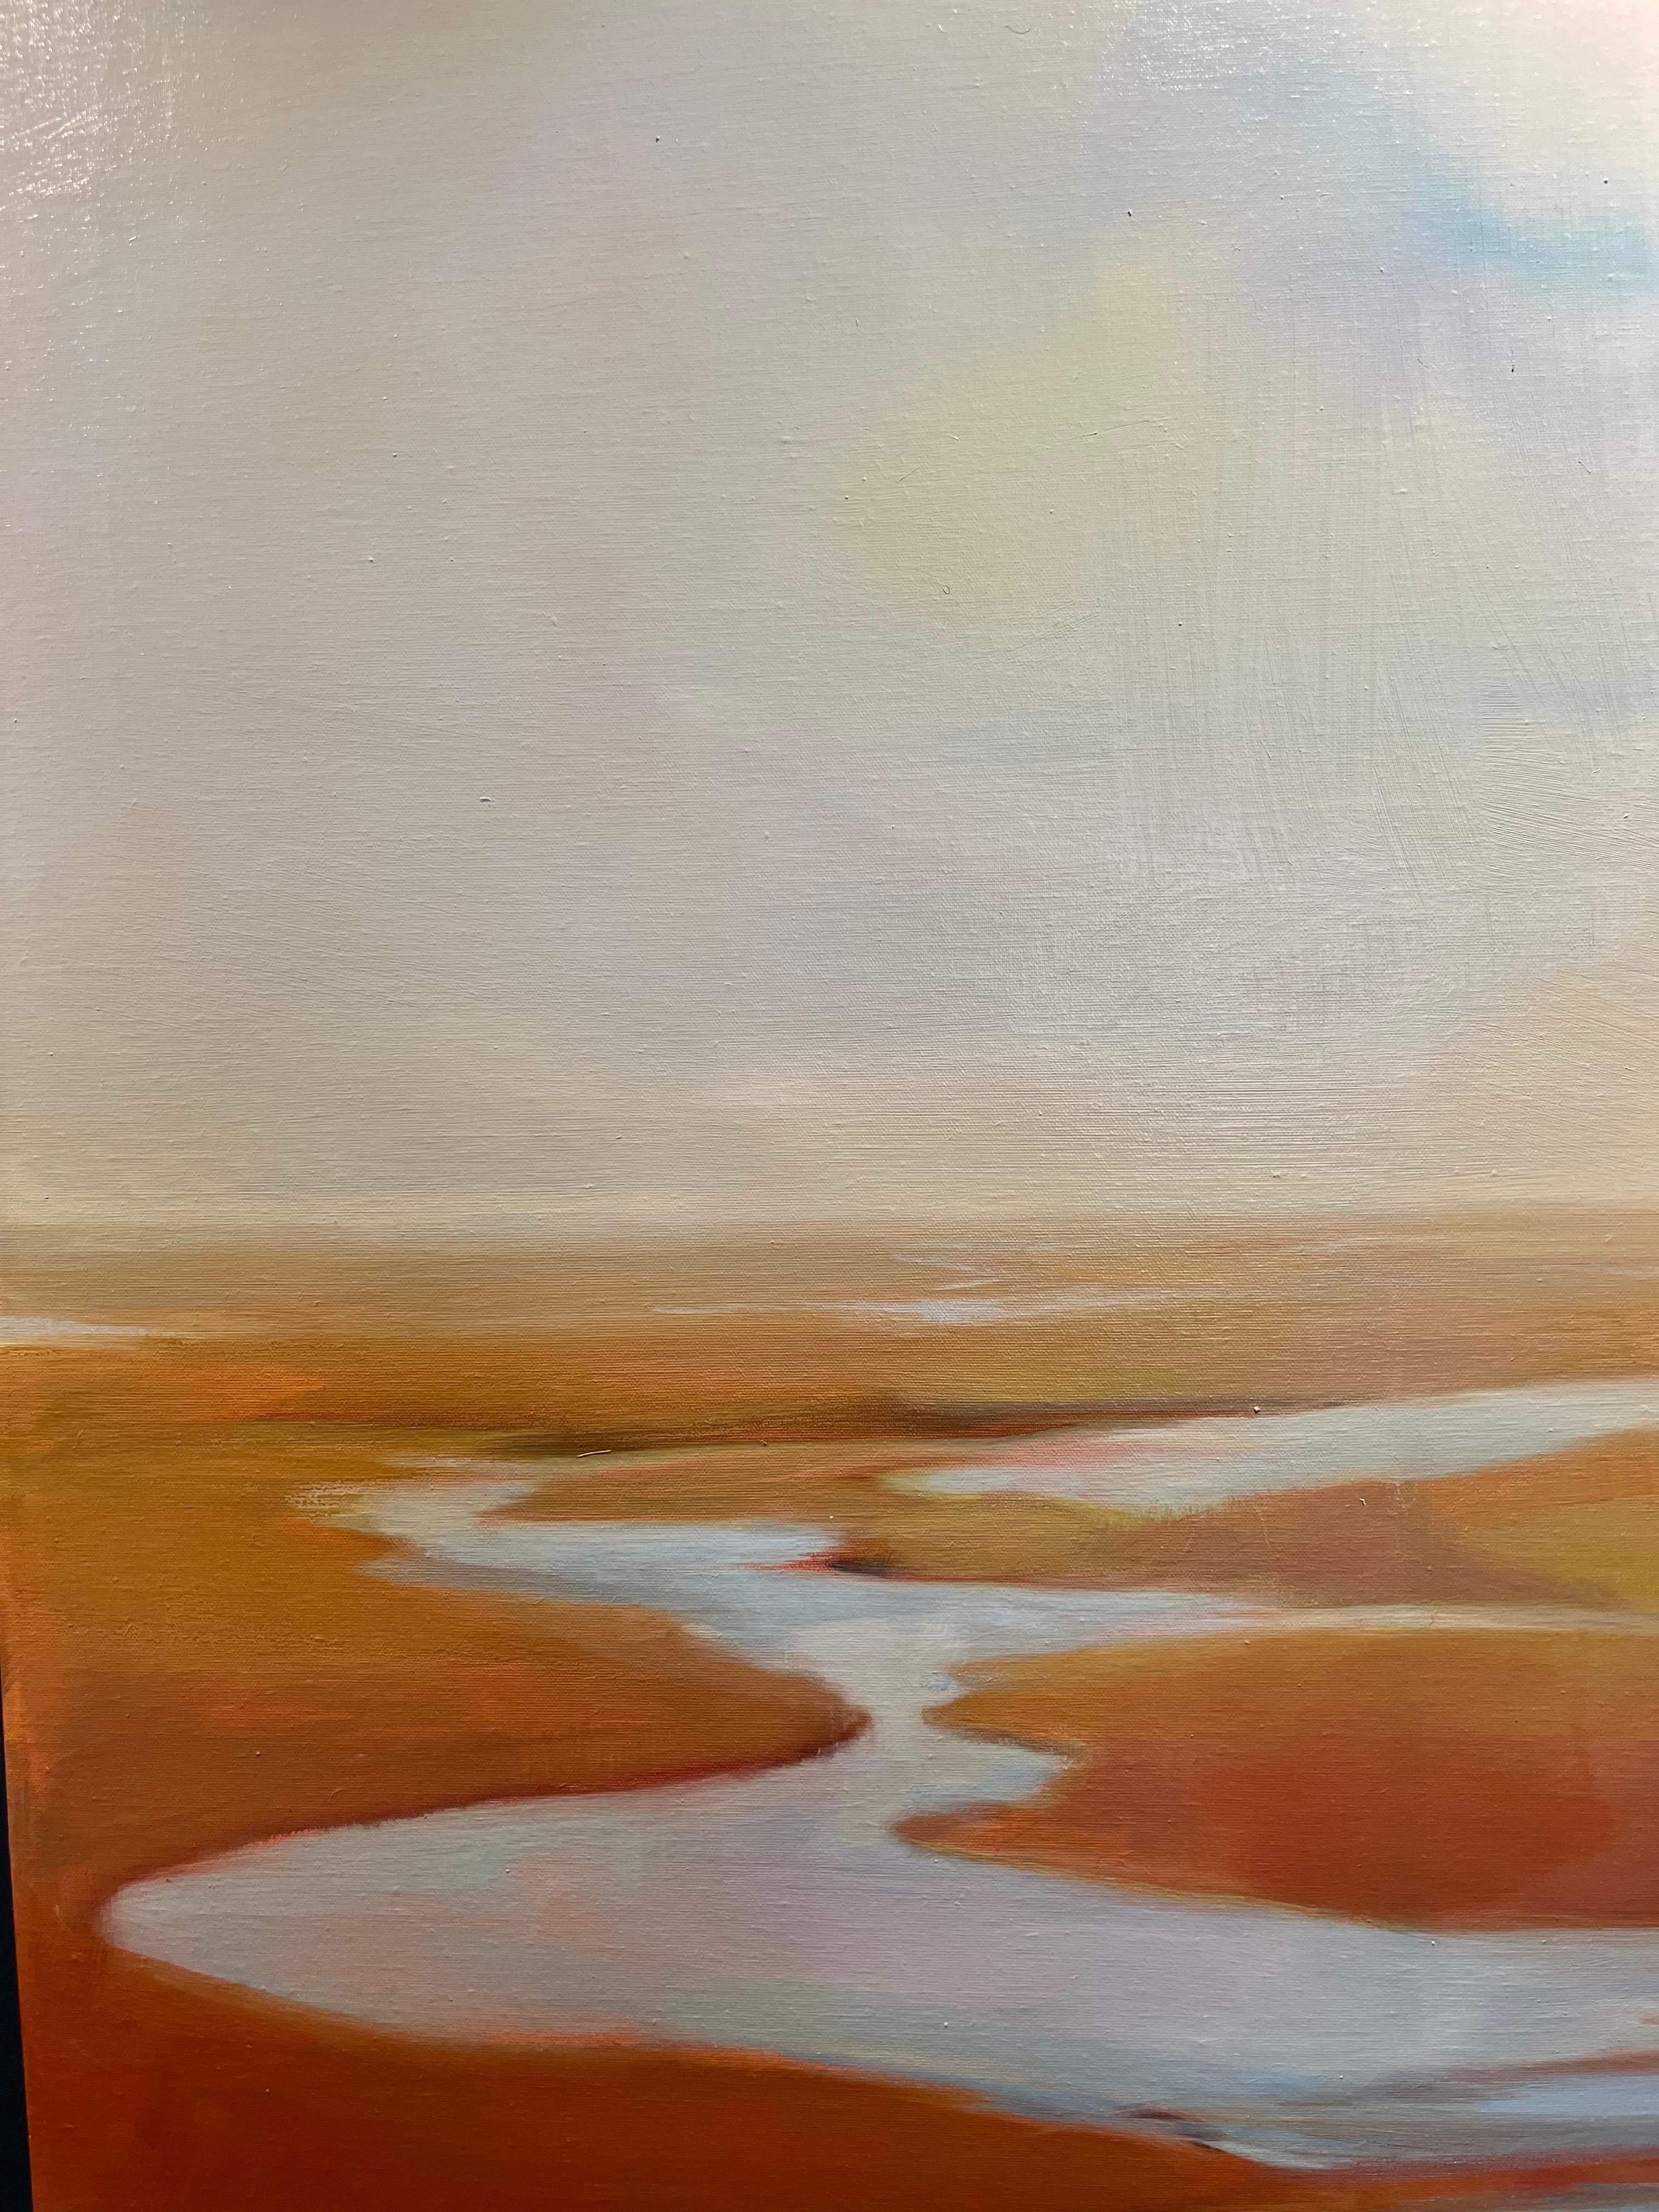 Large aerial landscape of the northern European sea
Orange, red, brown
Birgitte LYKKE MADSEN (Odense, Denmark, 1960)

1981-86, Educated from the Academy of Fine Arts, Odense
First solo exhibition in 1983

Artist statement:

“I am a painter. I am